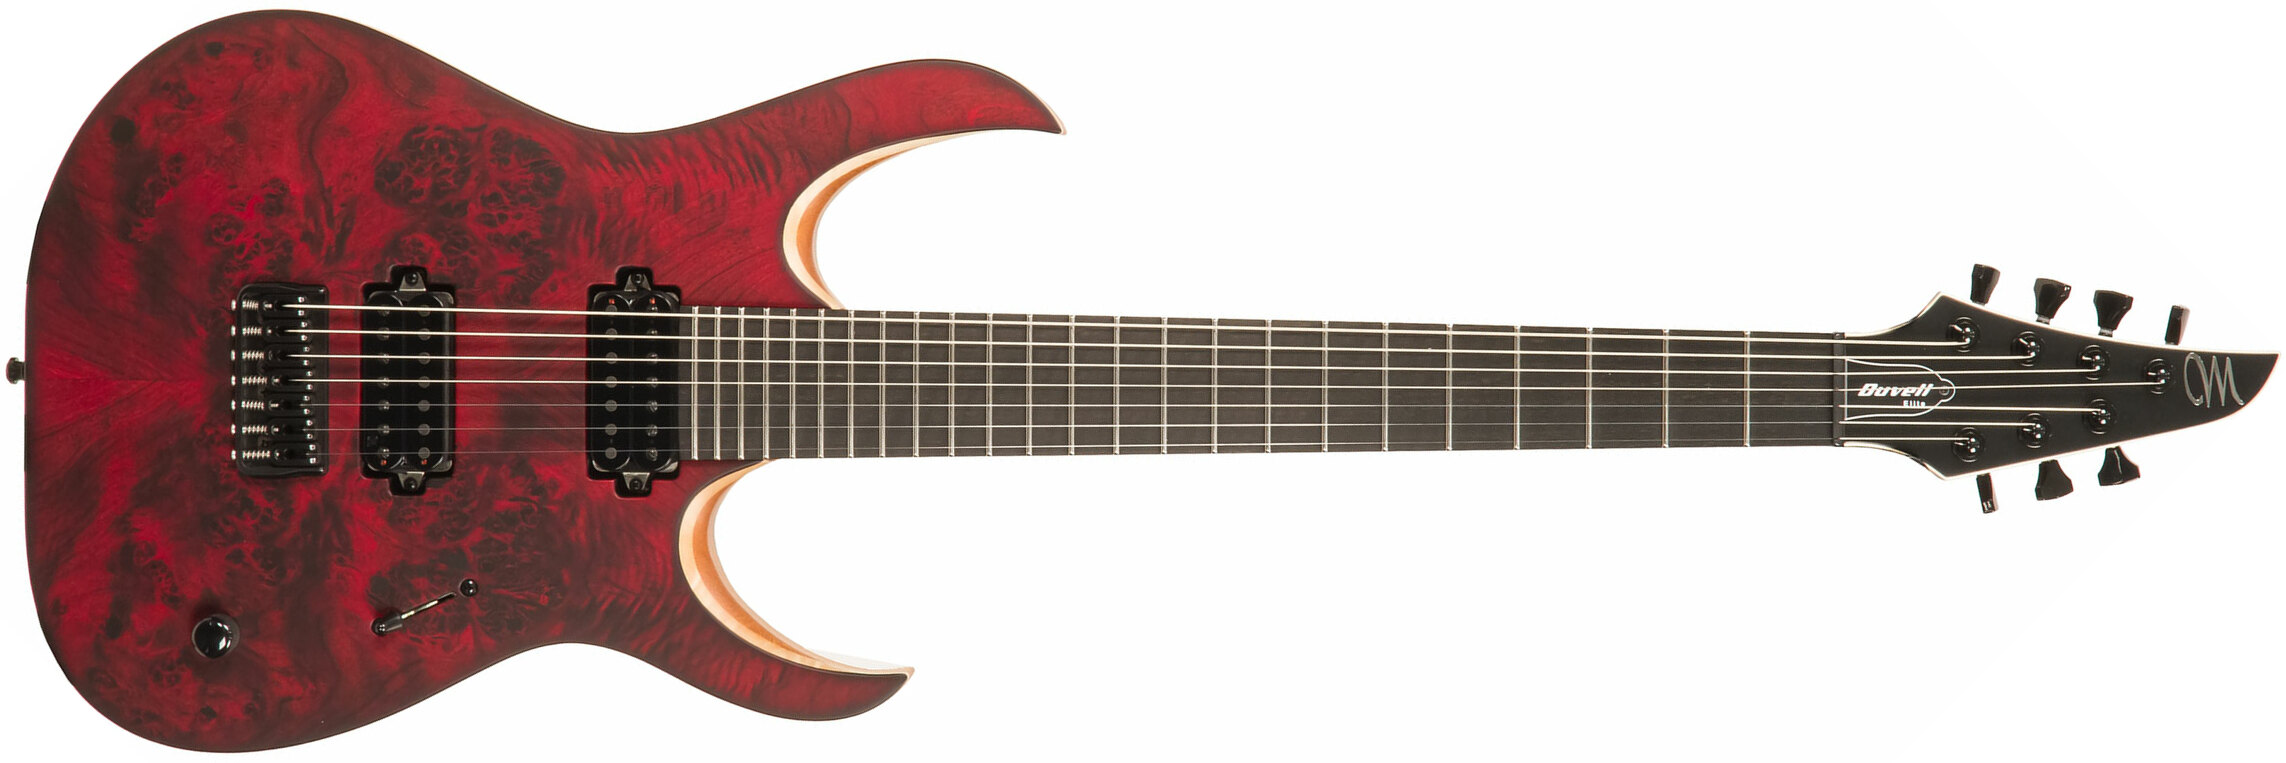 Mayones Guitars Duvell Elite 7 Hh Tko Ht Eb - Dirty Red Satin - 7 string electric guitar - Main picture